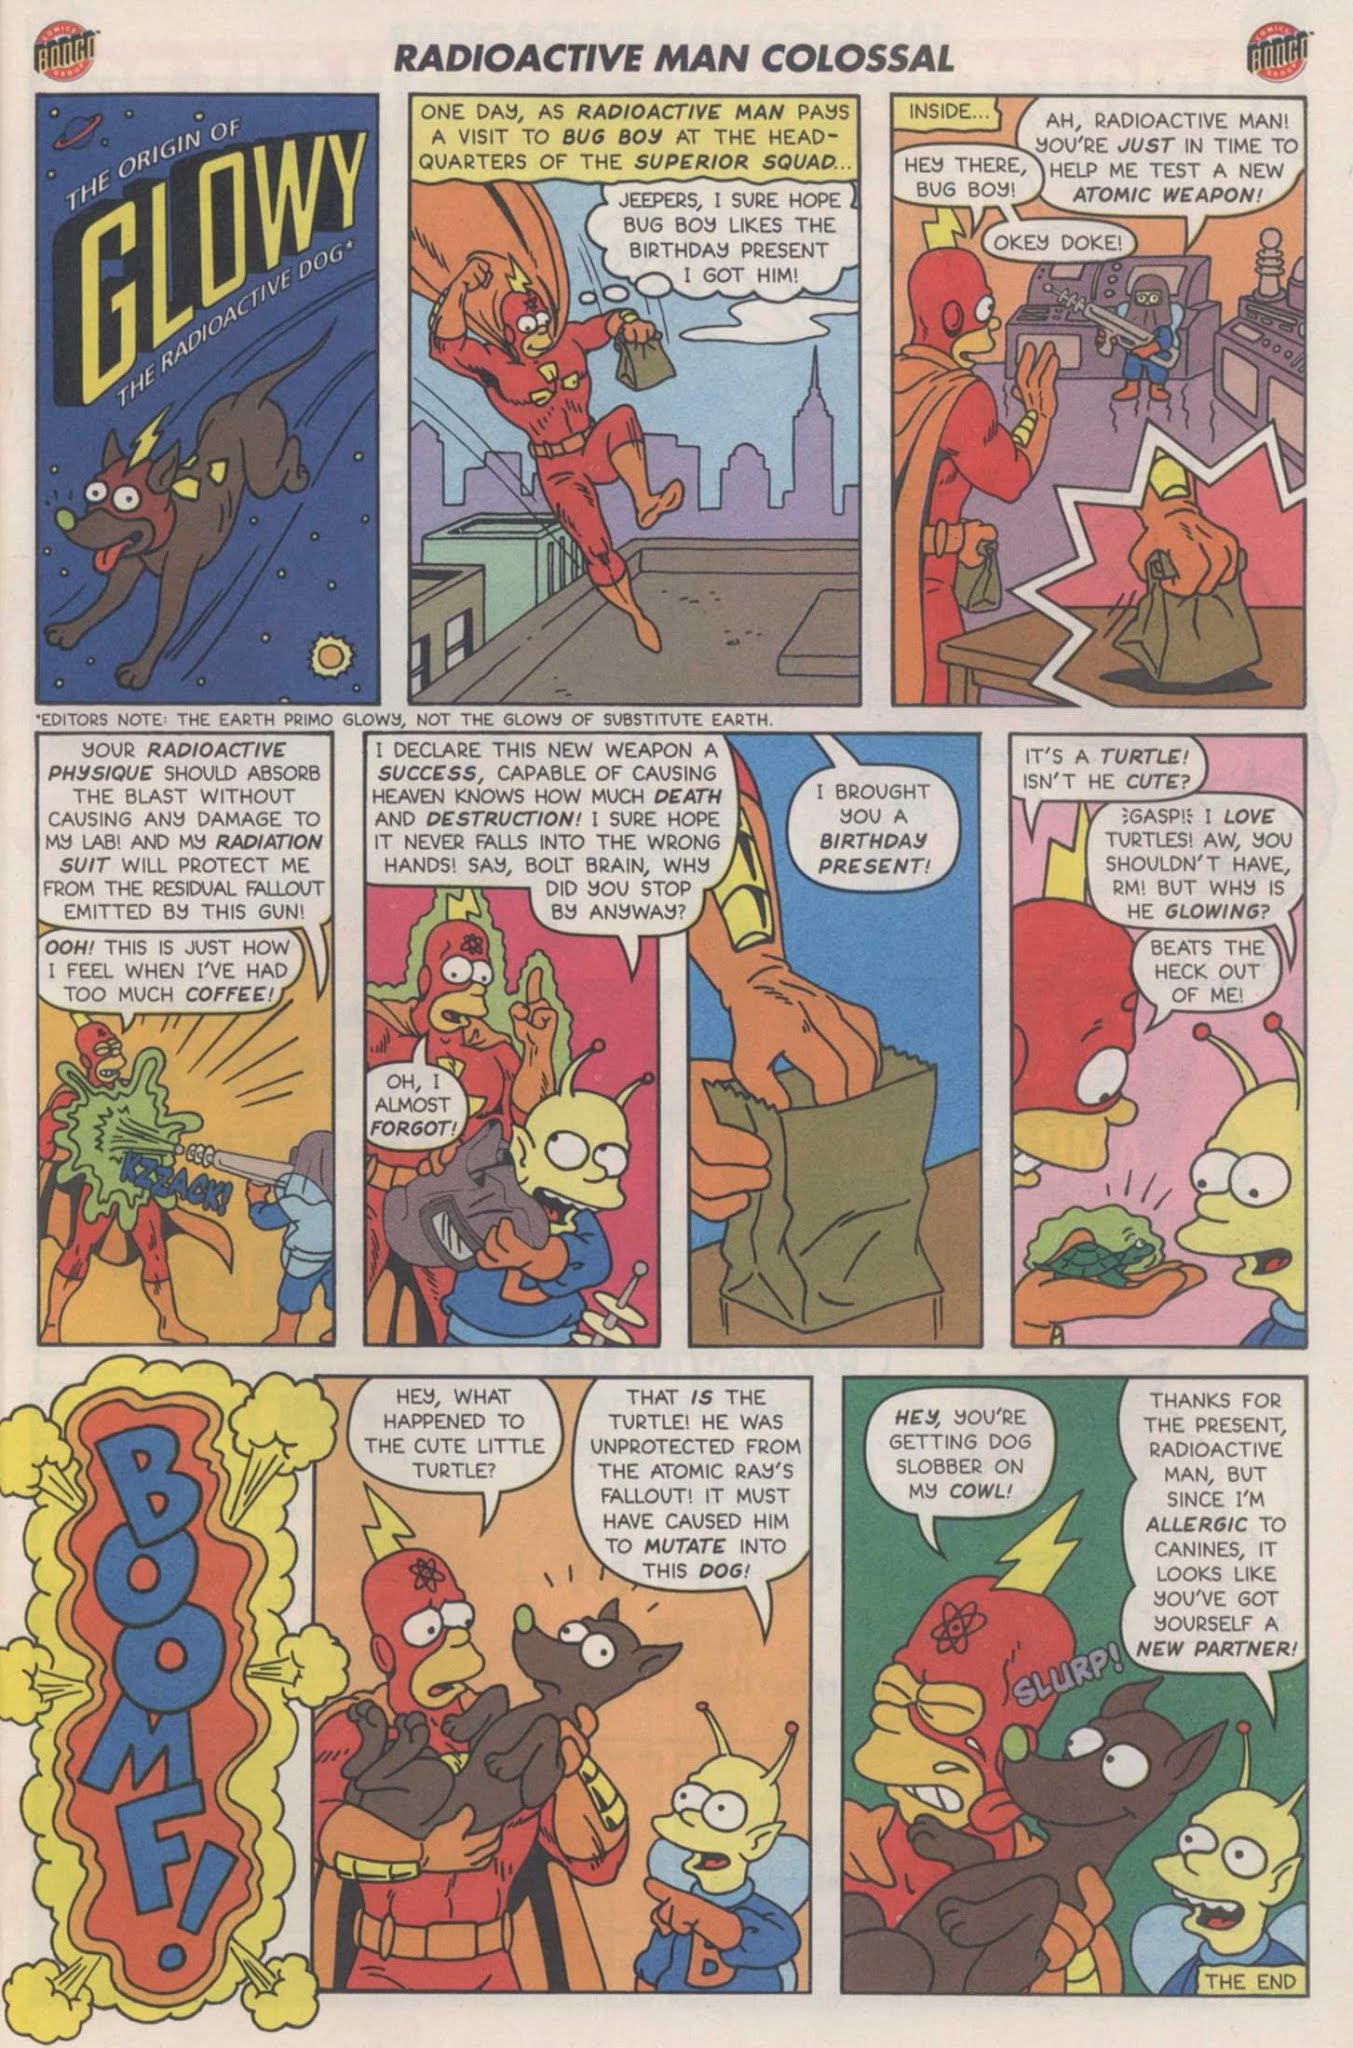 Read online Radioactive Man 80 pg. Colossal comic -  Issue # Full - 45